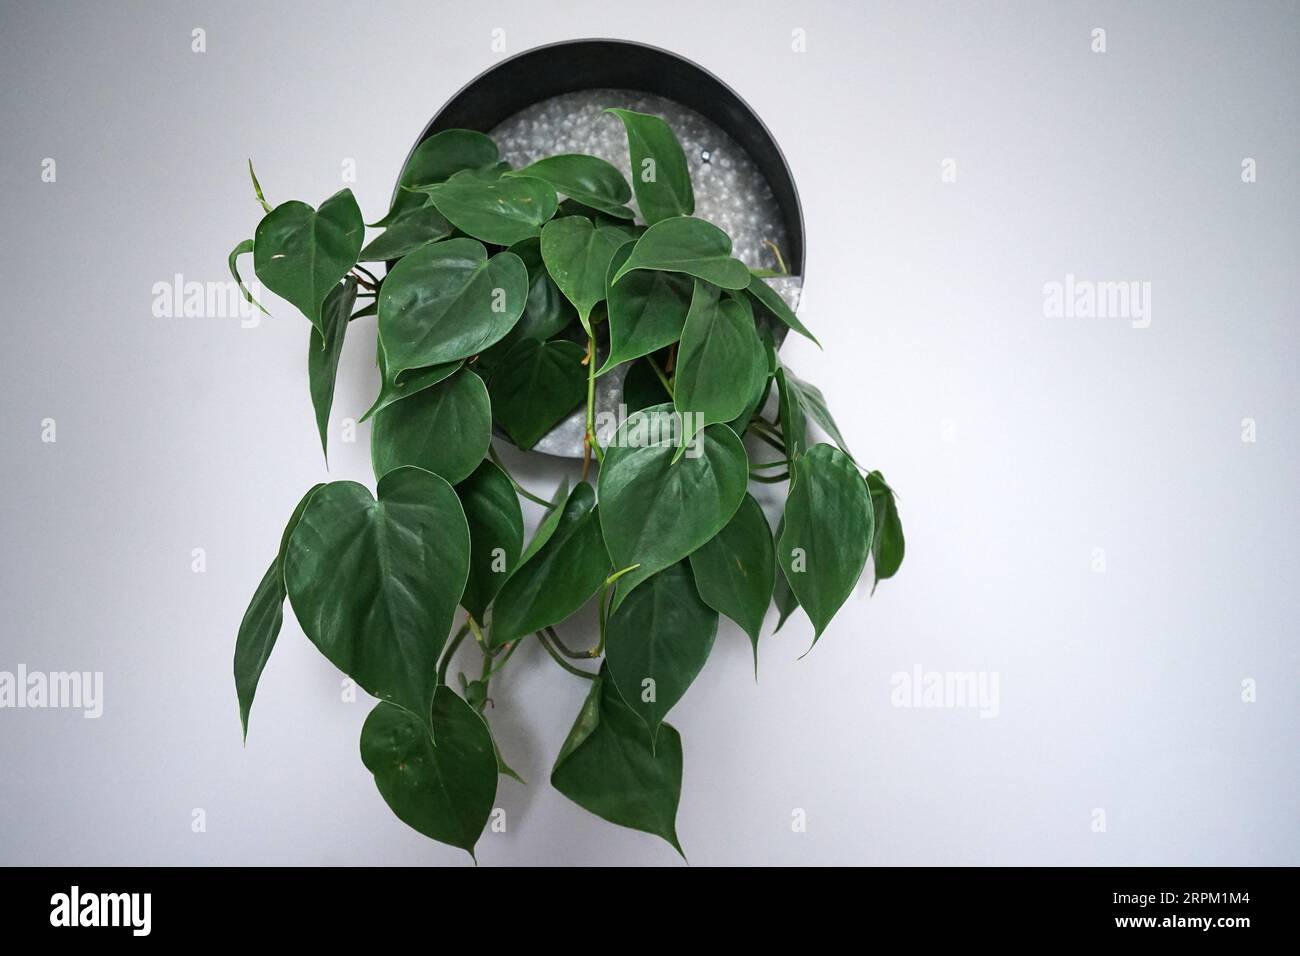 Metal wall planter decoration and design with green plant Stock Photo